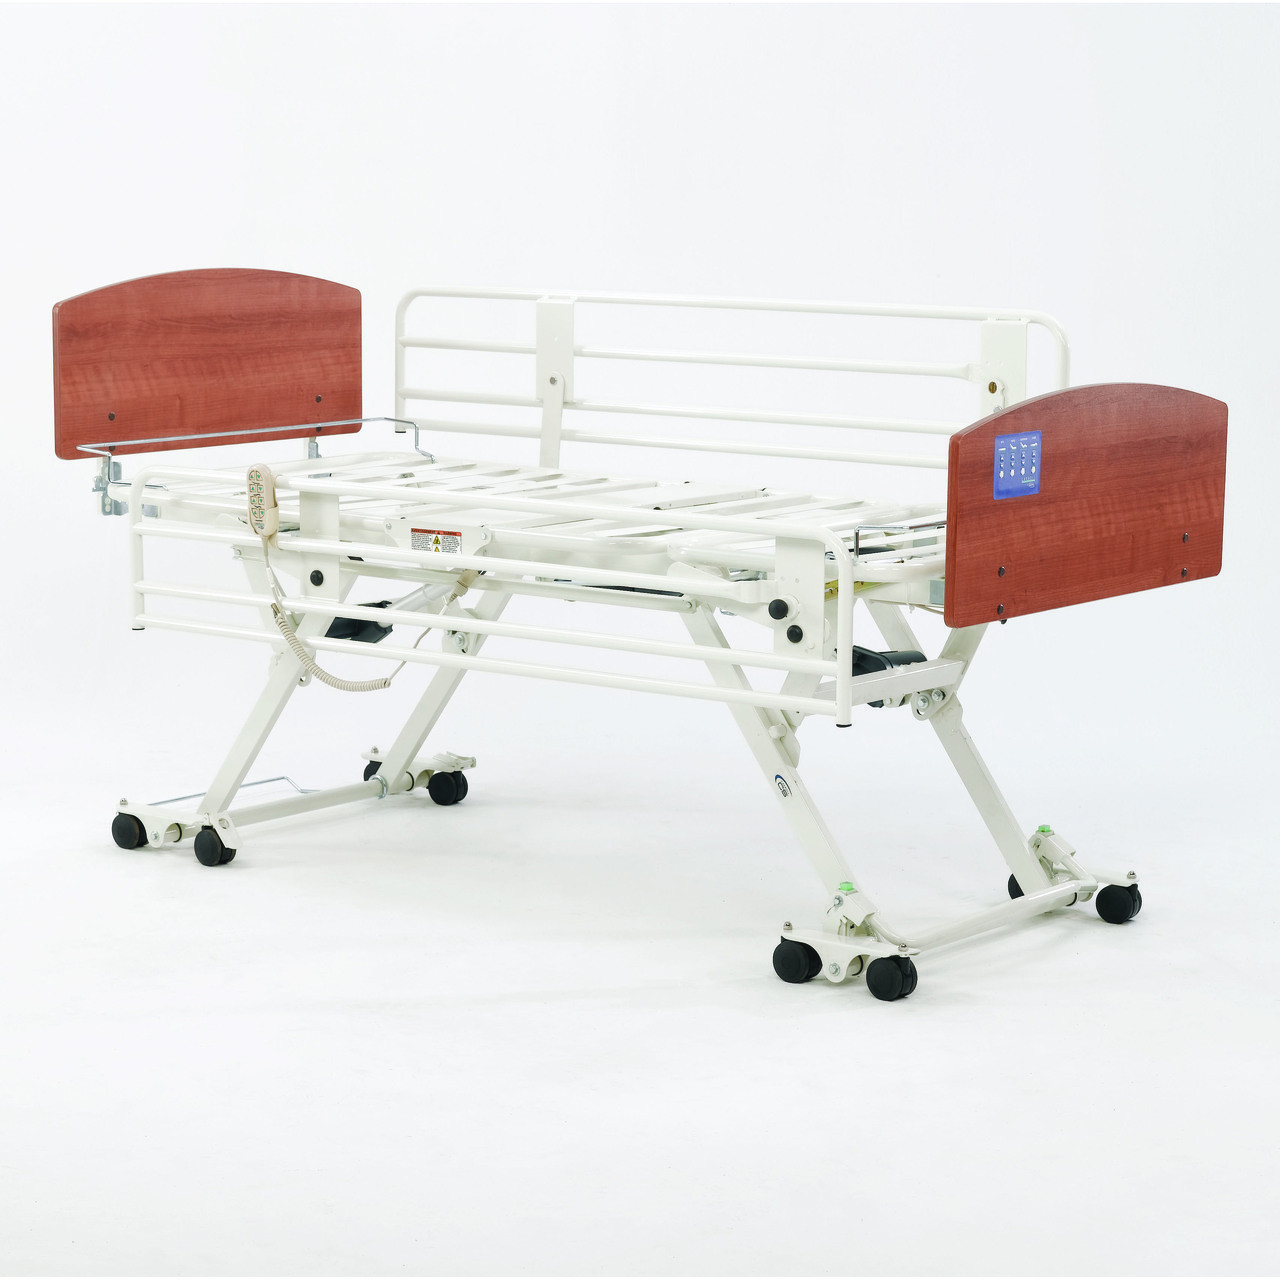 Invacare Hospital Bed Parts List